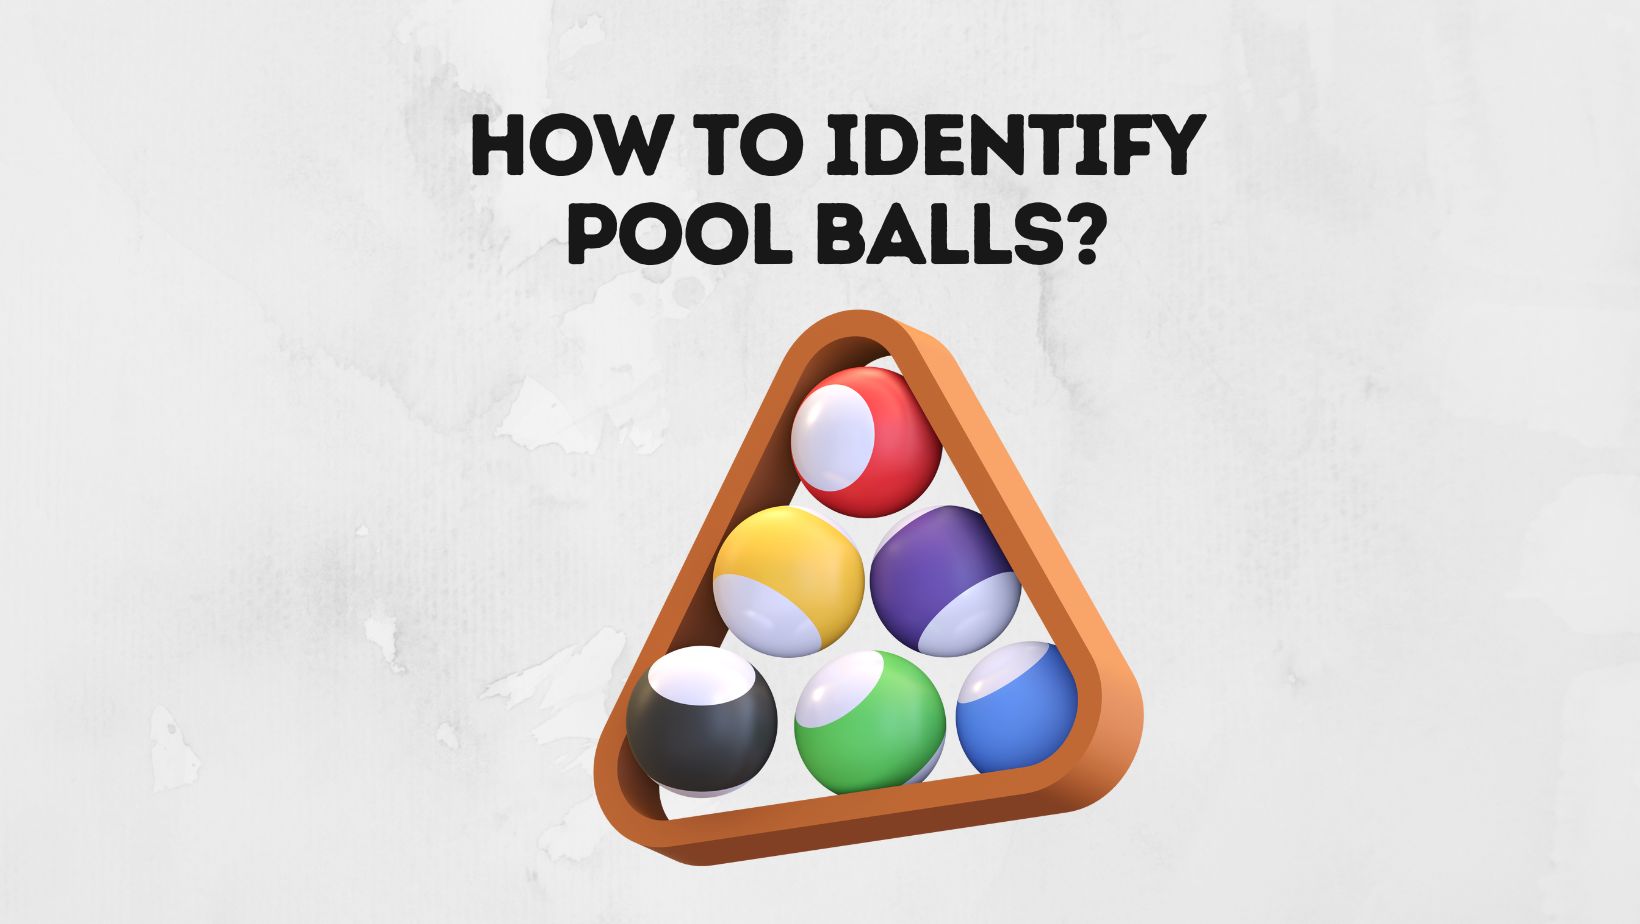 How To Identify Pool Balls